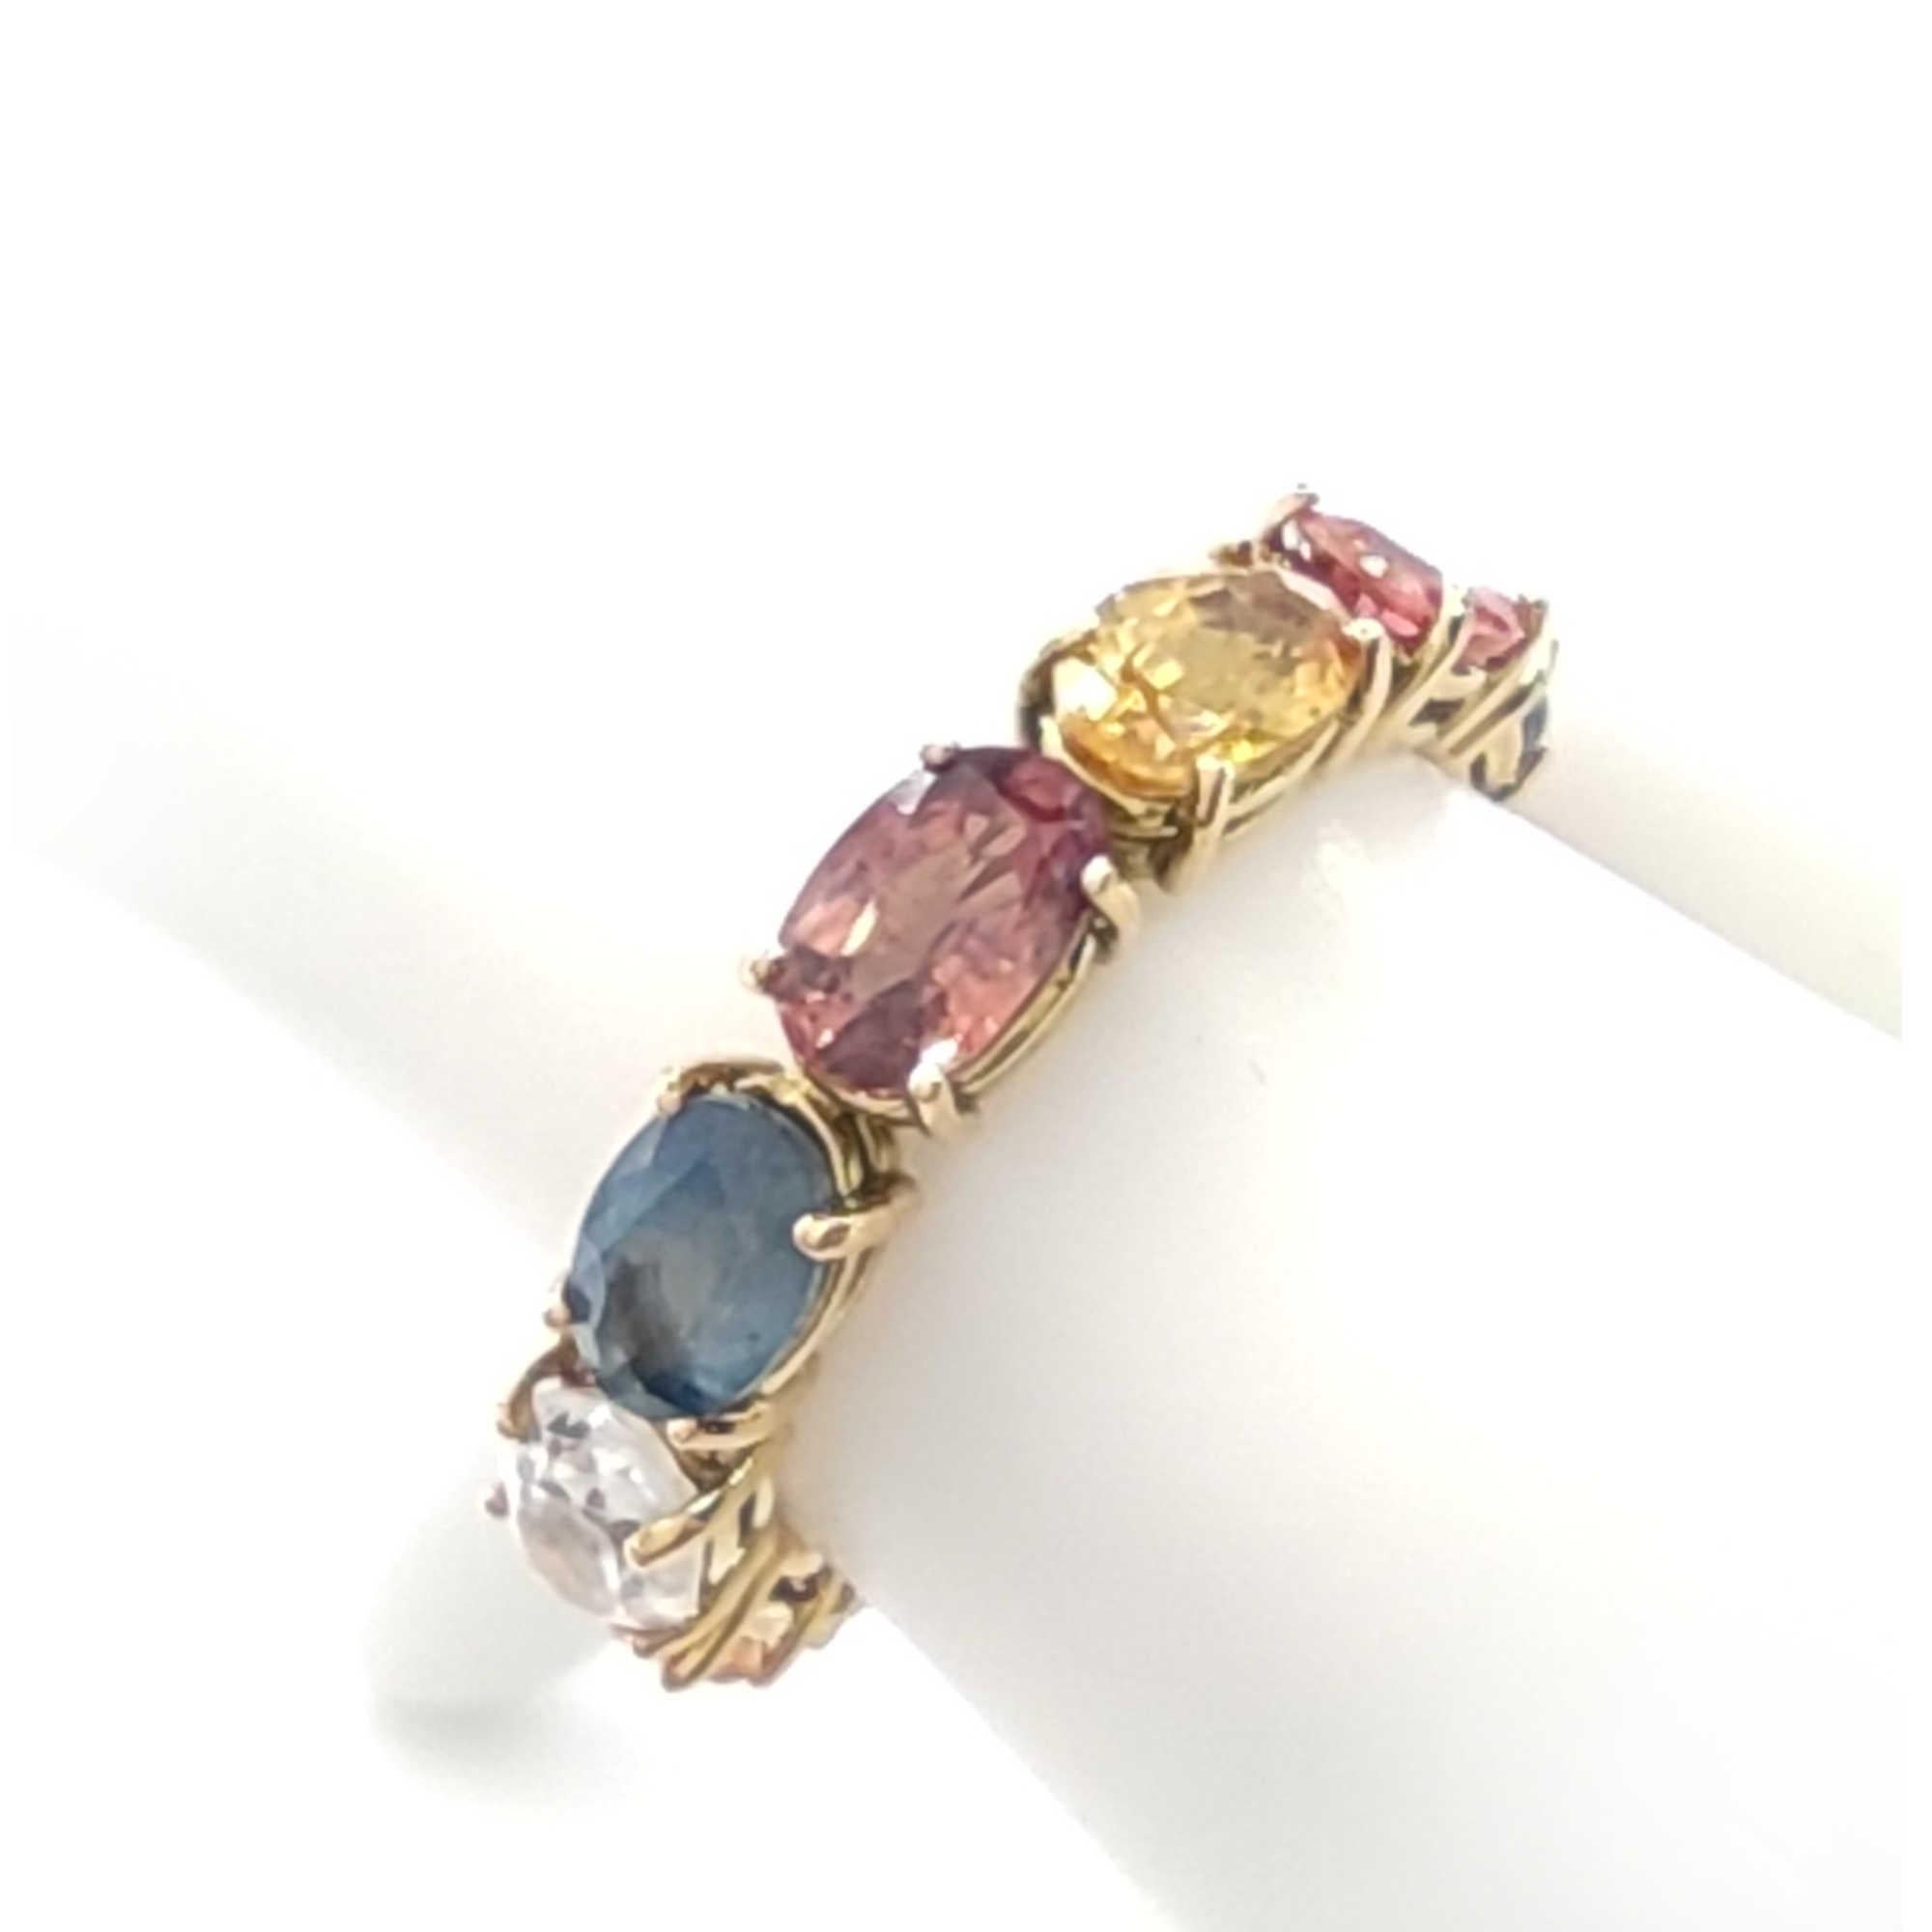 Unique 14kt Yellow Gold Ring with Handcrafted Design & Sapphires - Shop Now In New Condition For Sale In Sant Josep de sa Talaia, IB